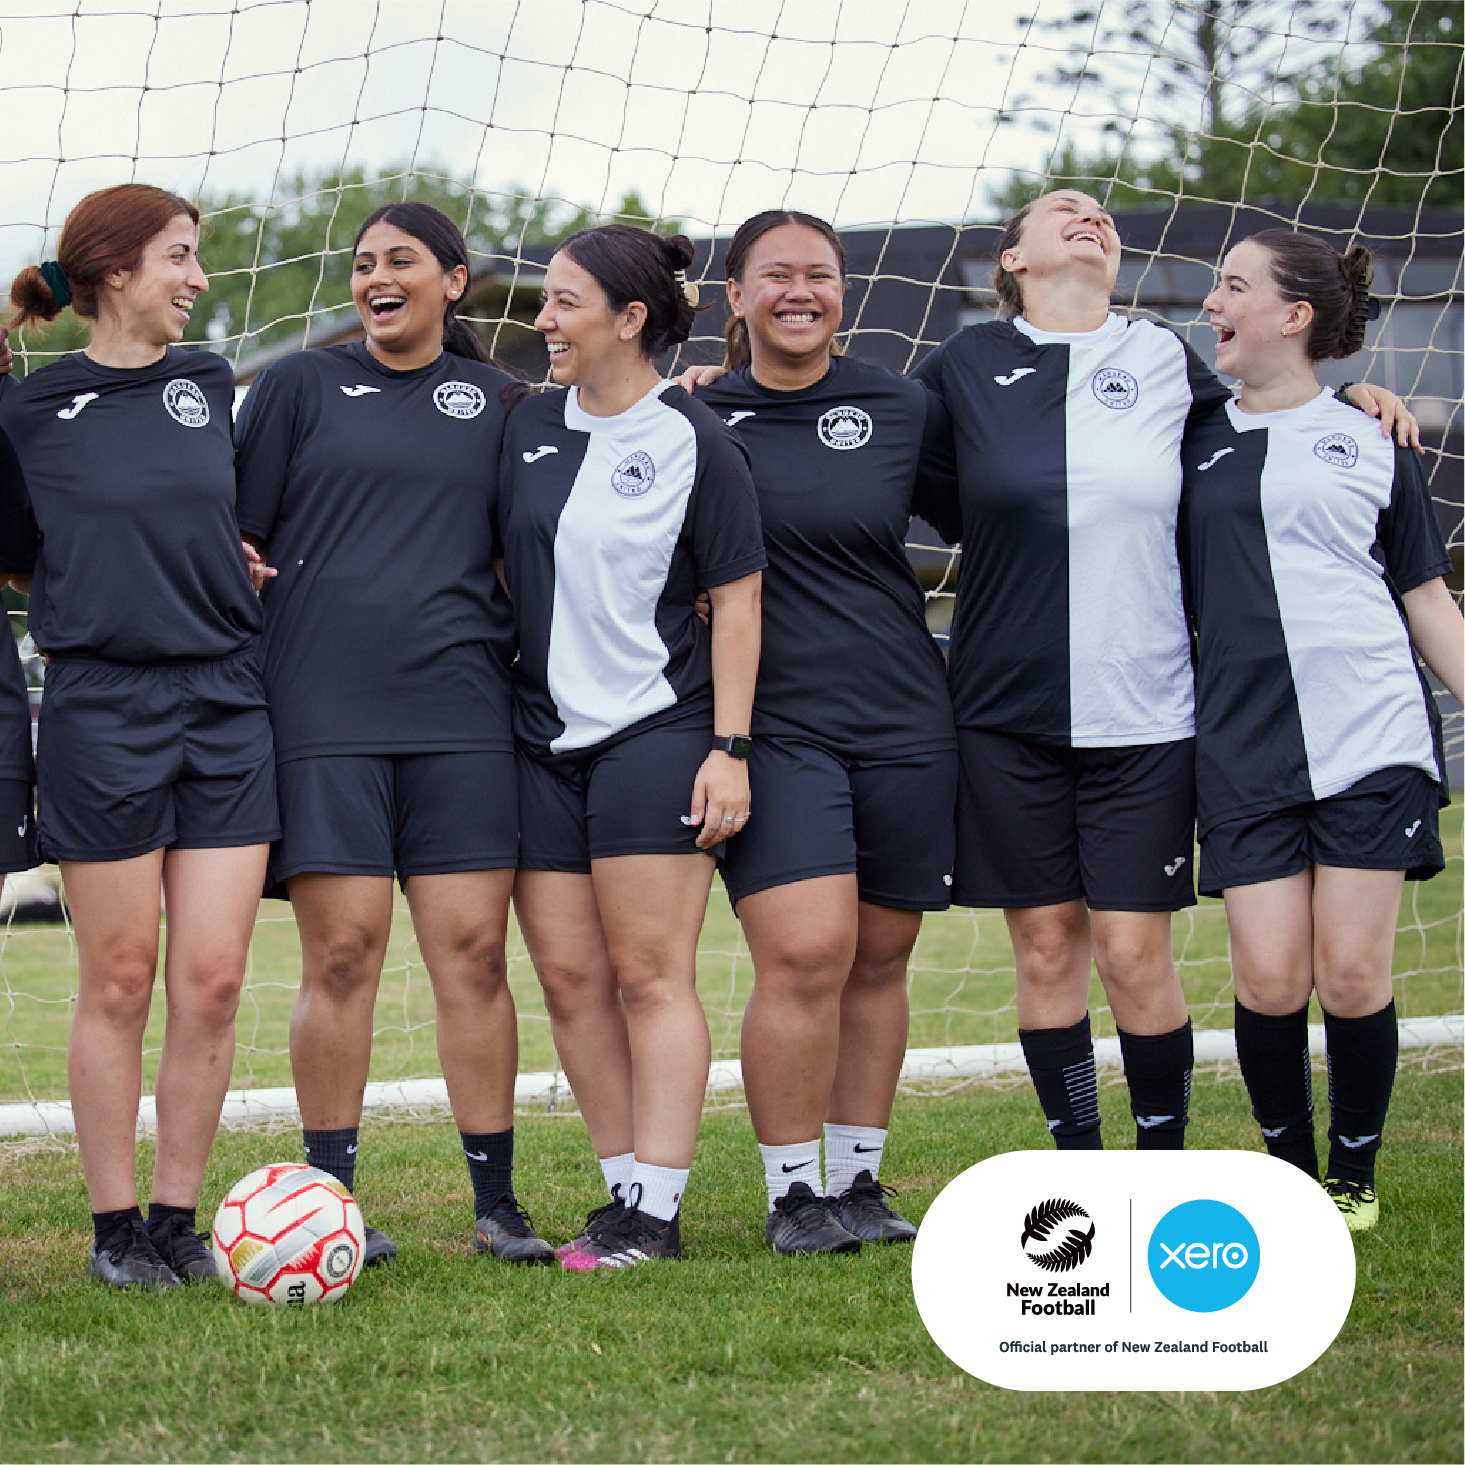 Women players from Manukau United FC stand together in front of a football goal, smiling to camera